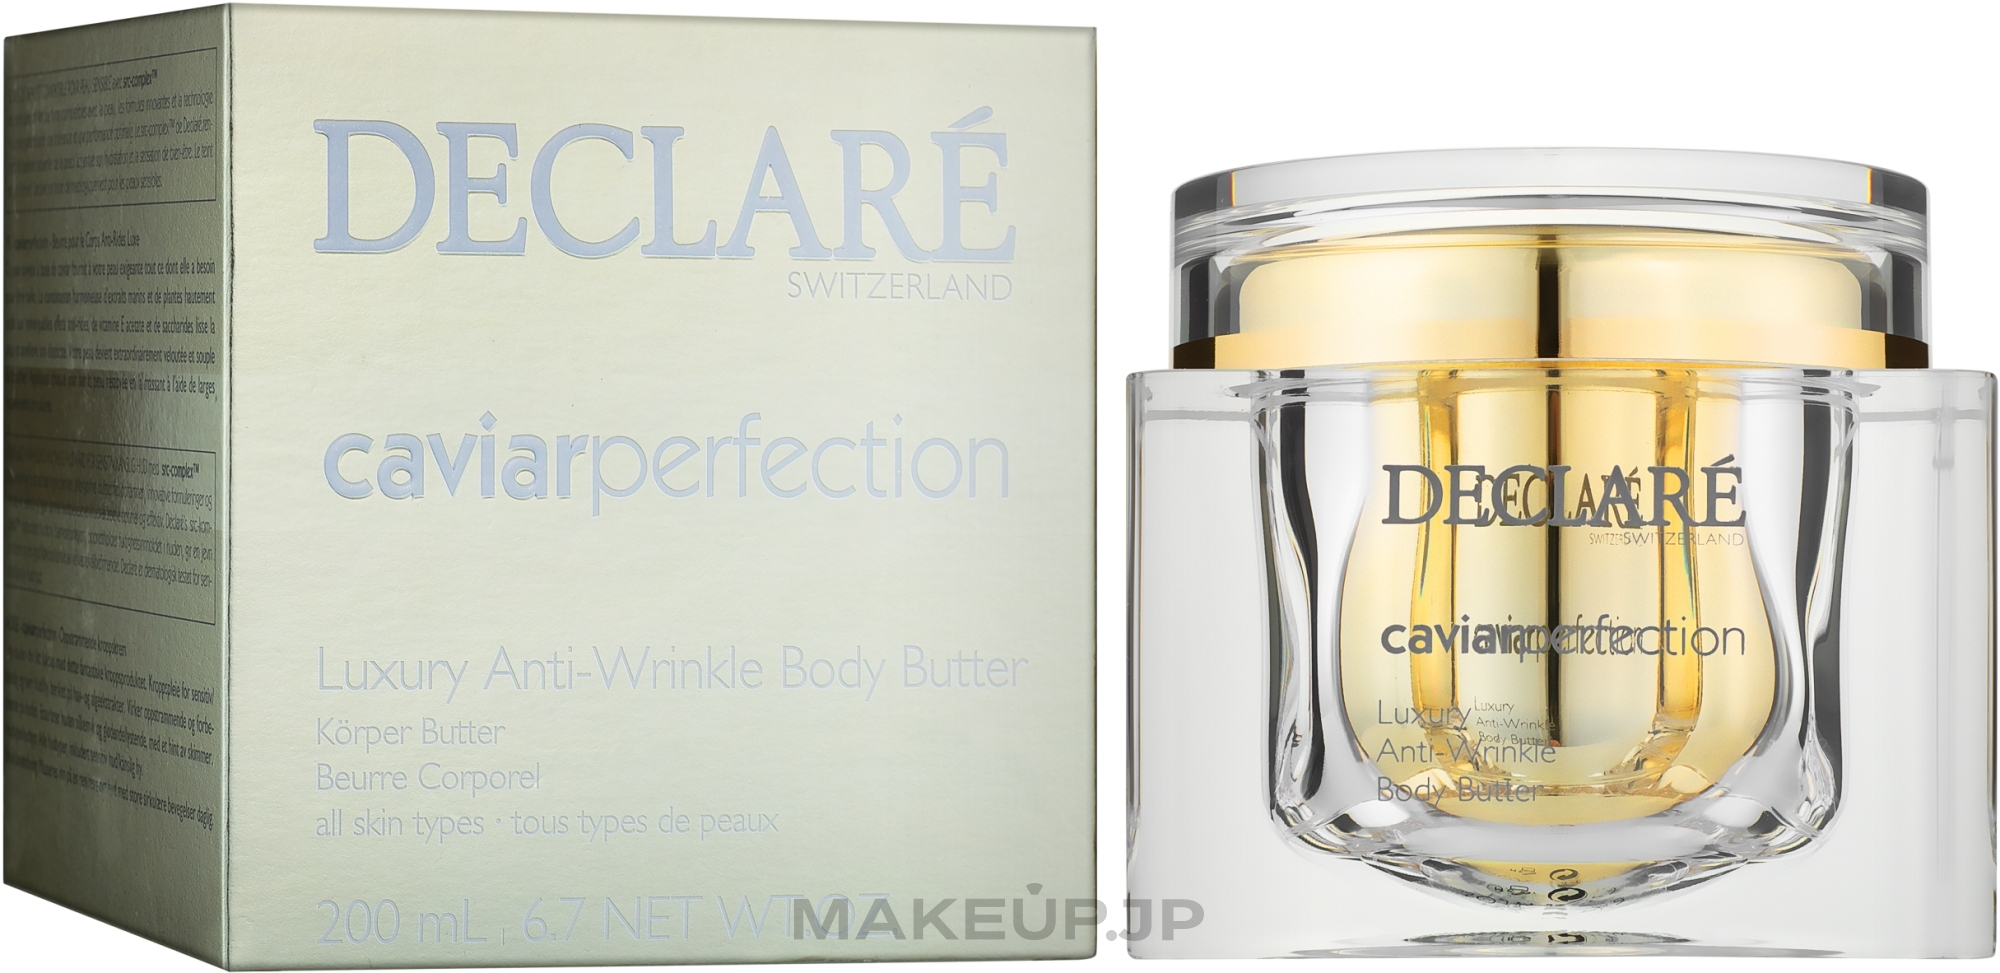 Nourishing Body Butter with Black Caviar Extract - Declare Luxury Anti-Wrinkle Butter — photo 200 ml